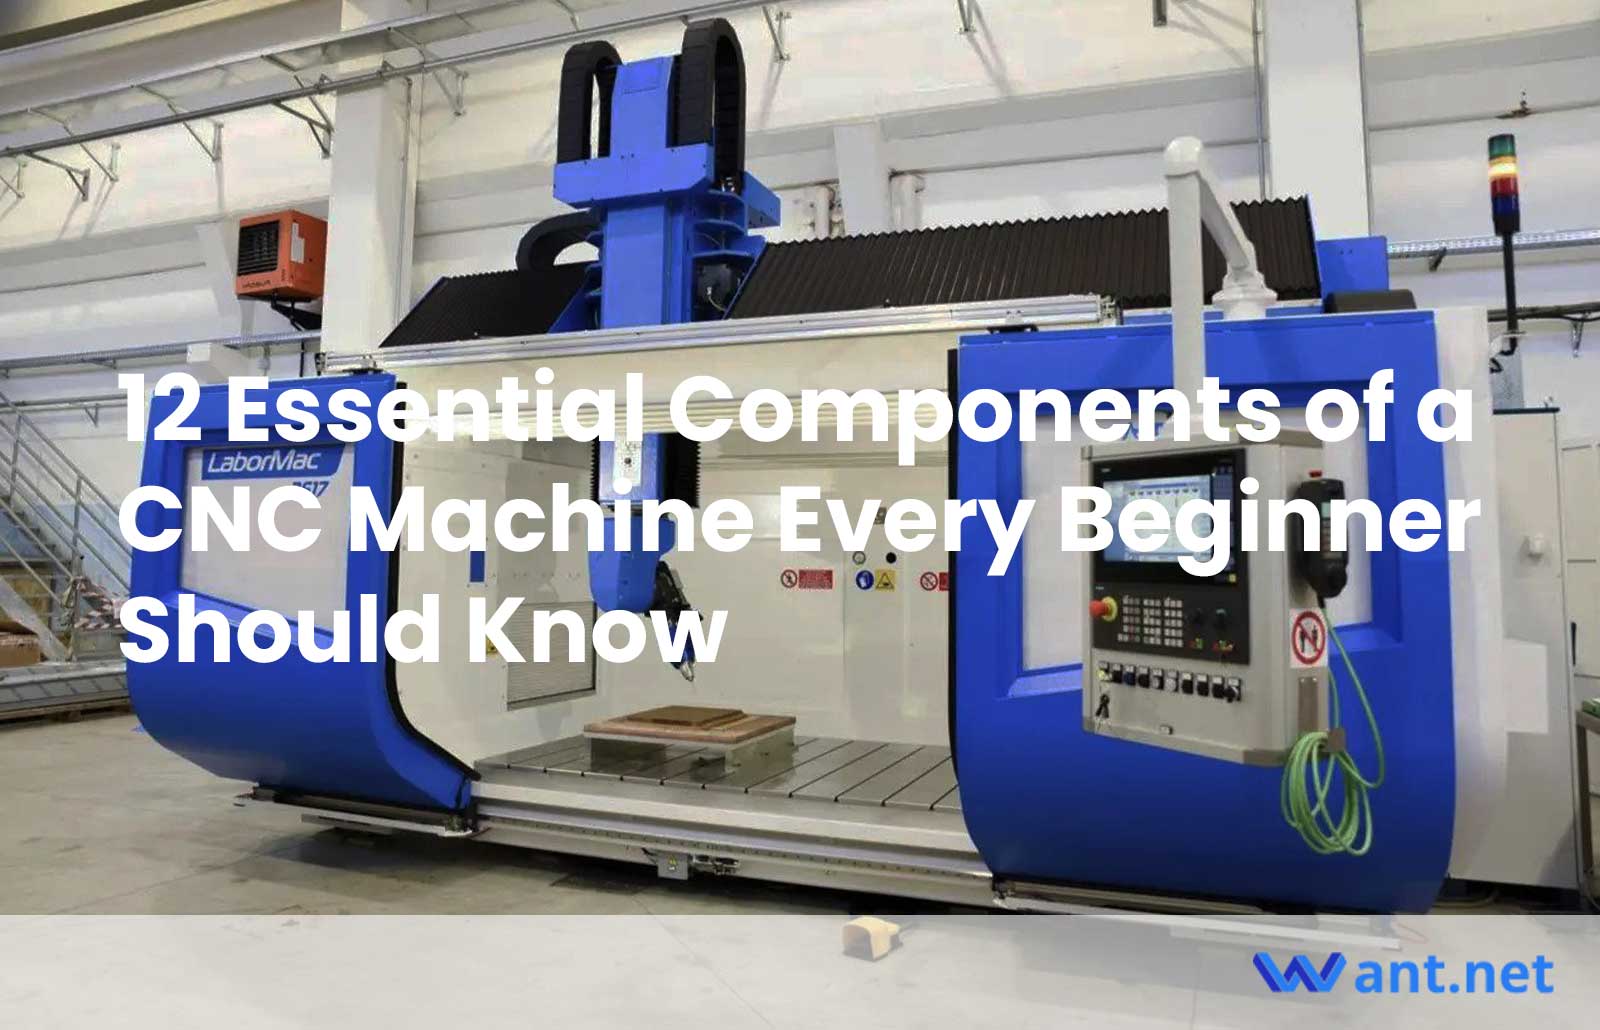 12 Essential Components of a CNC Machine Every Beginner Should Know